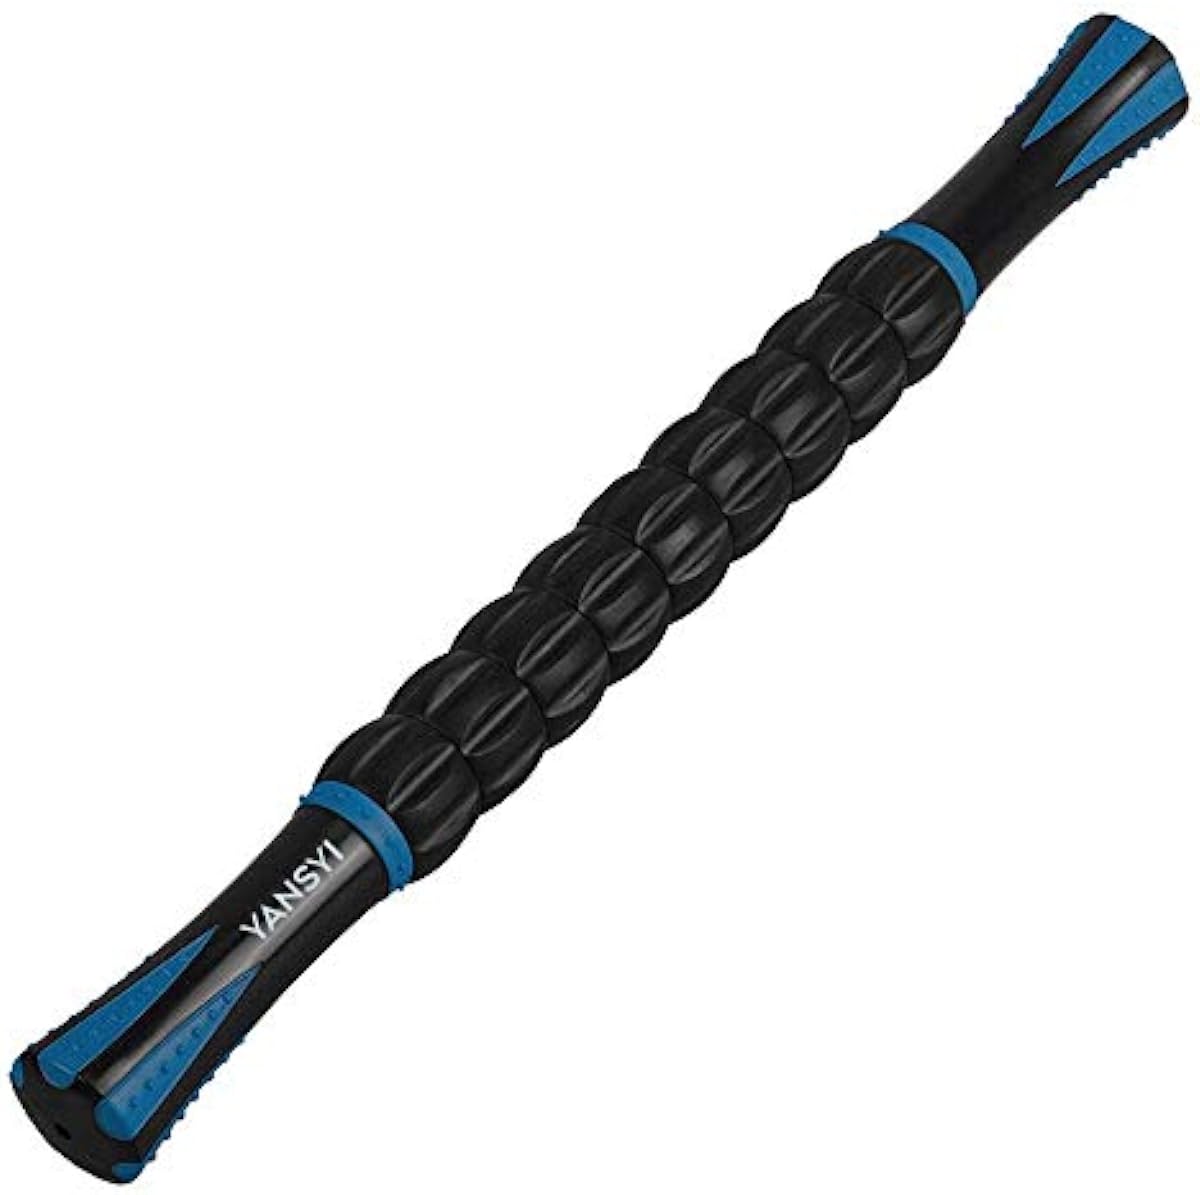 Yansyi Muscle Roller Stick for Athletes - Body Massage Roller Stick - Release Myofascial Trigger Points Reduce Muscle Soreness Tightness Leg Cramps & Back Pain for Physical Therapy & Recovery (Blue 1)